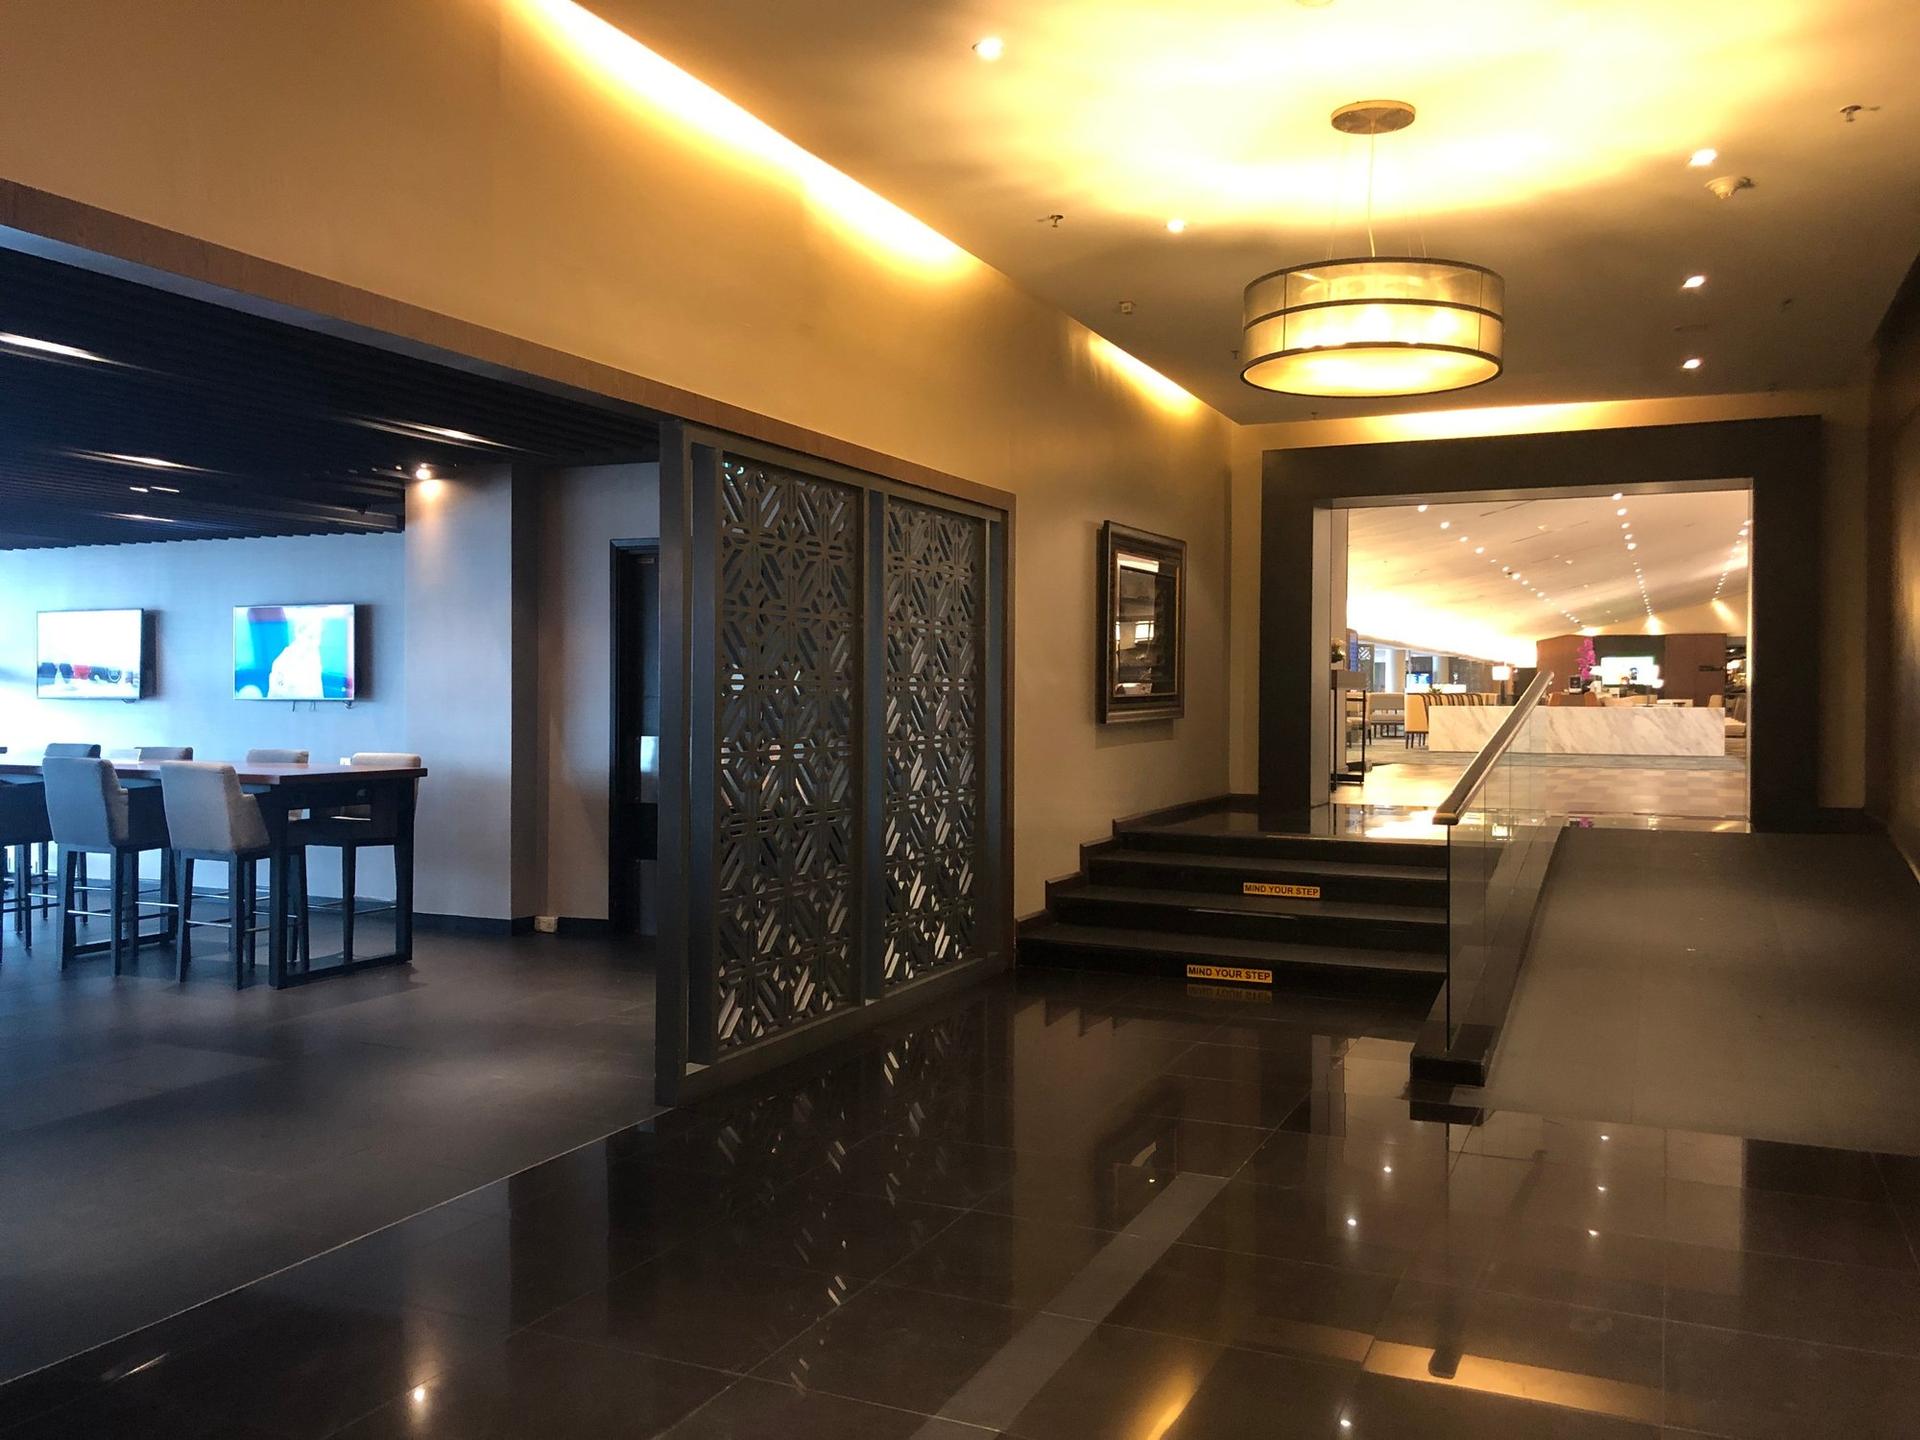 Malaysia Airlines Golden Business Class Lounge image 19 of 27